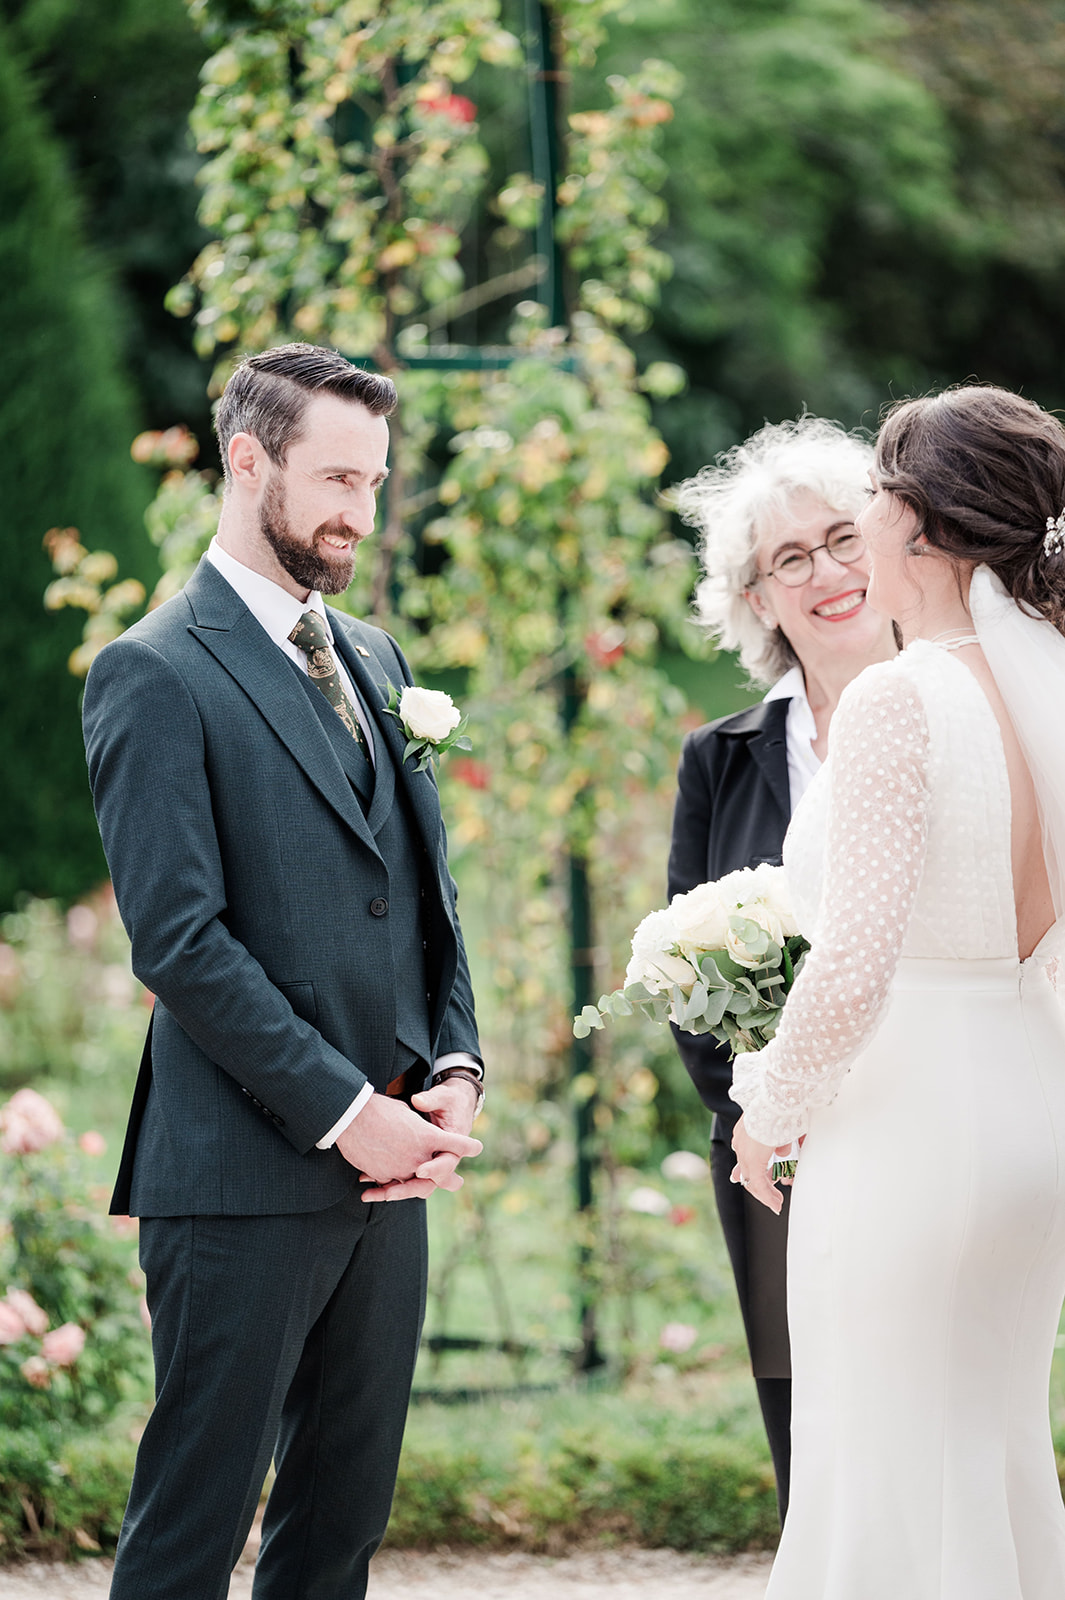 The groom laughs during the Vow exchange